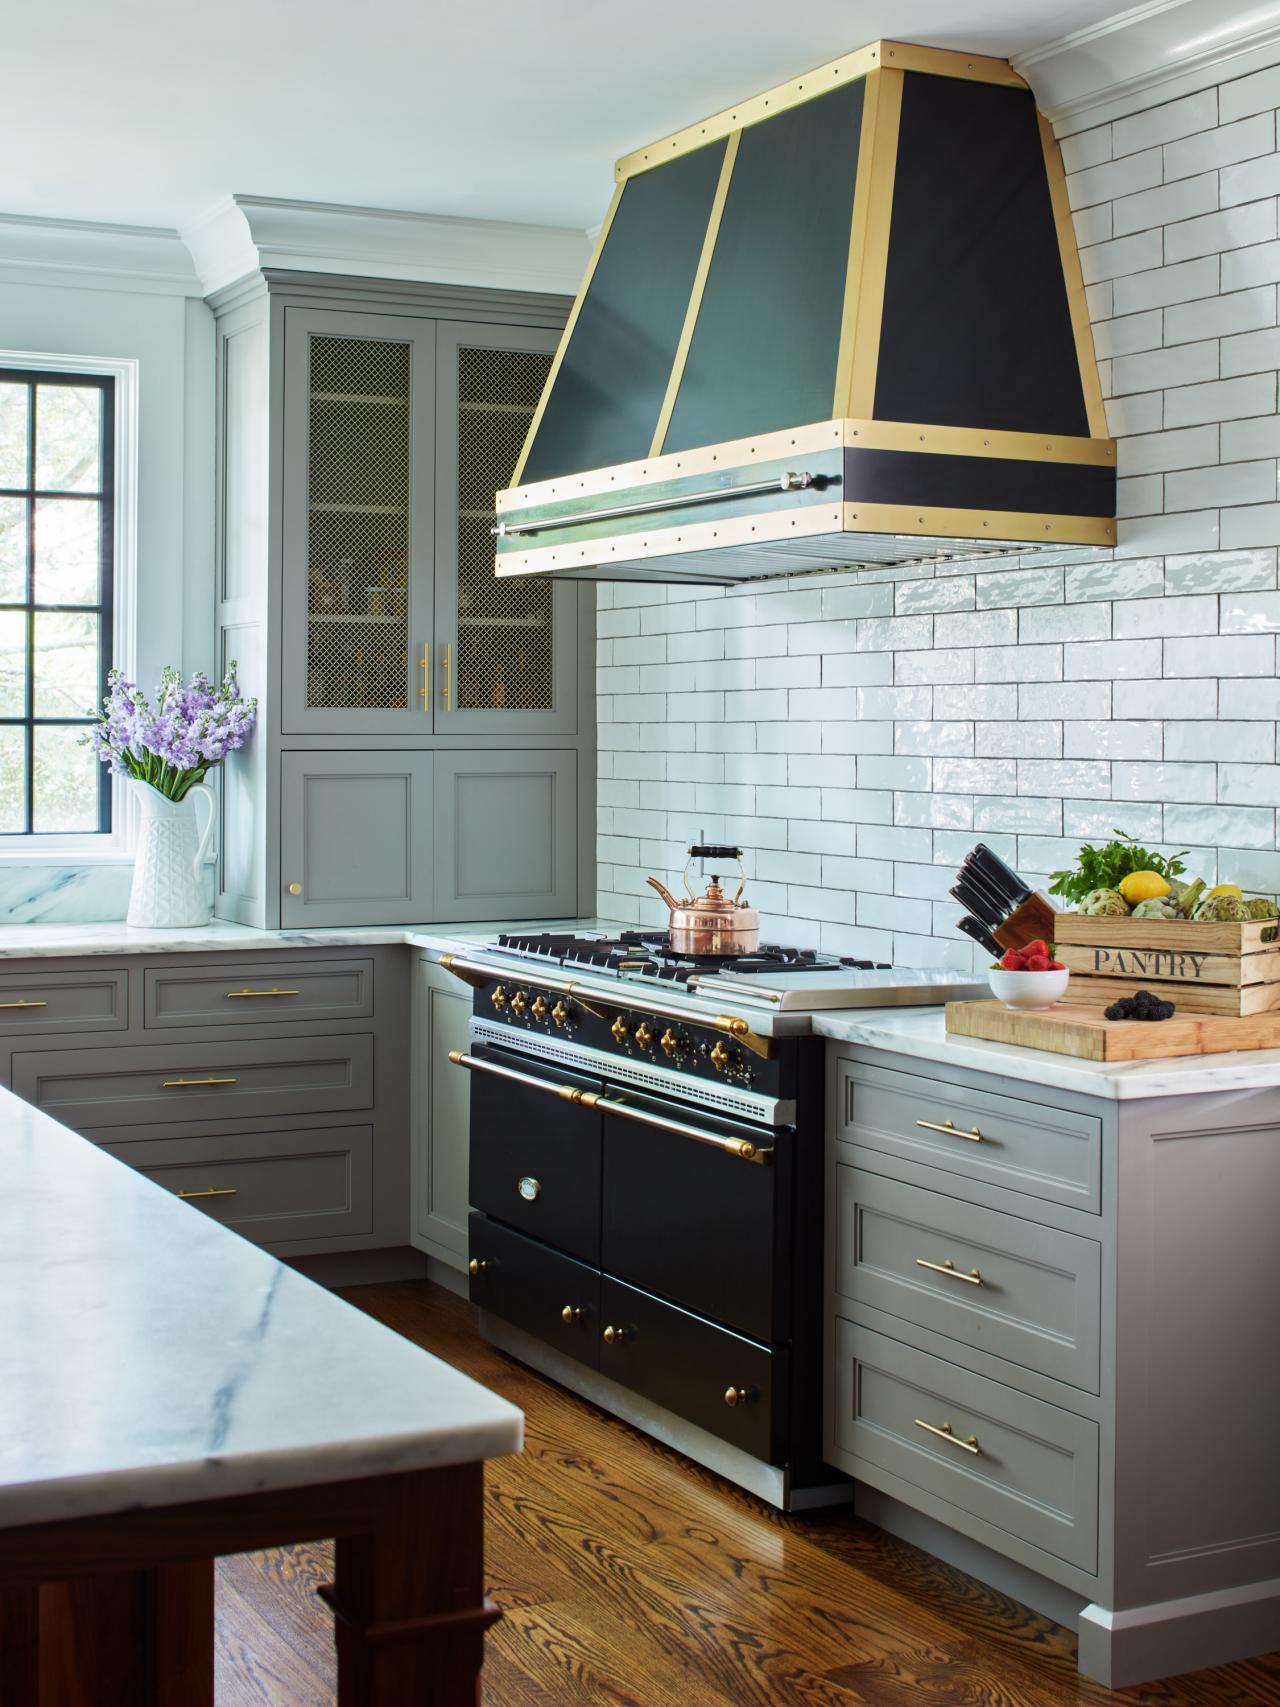 Subway Tile Backsplashes Pictures, How To Estimate A Subway Tile Backsplash